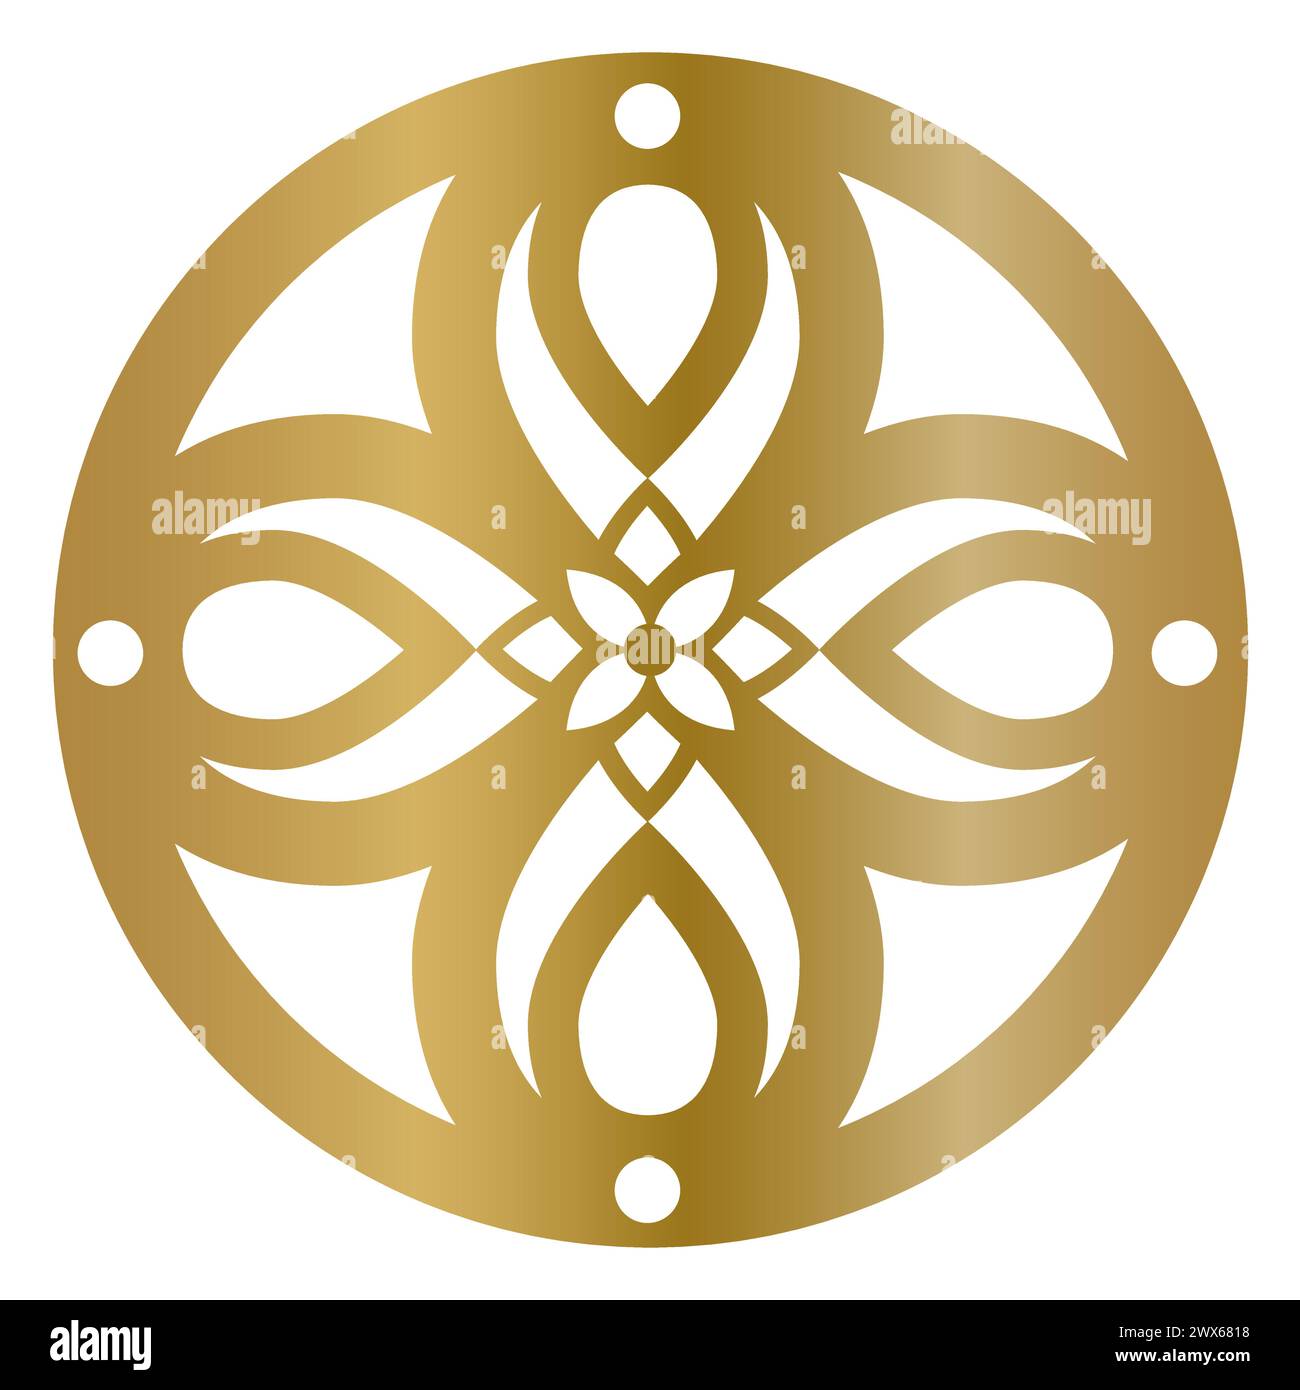 Isolated round golden emblem with petals in the shape of a cross Stock Vector